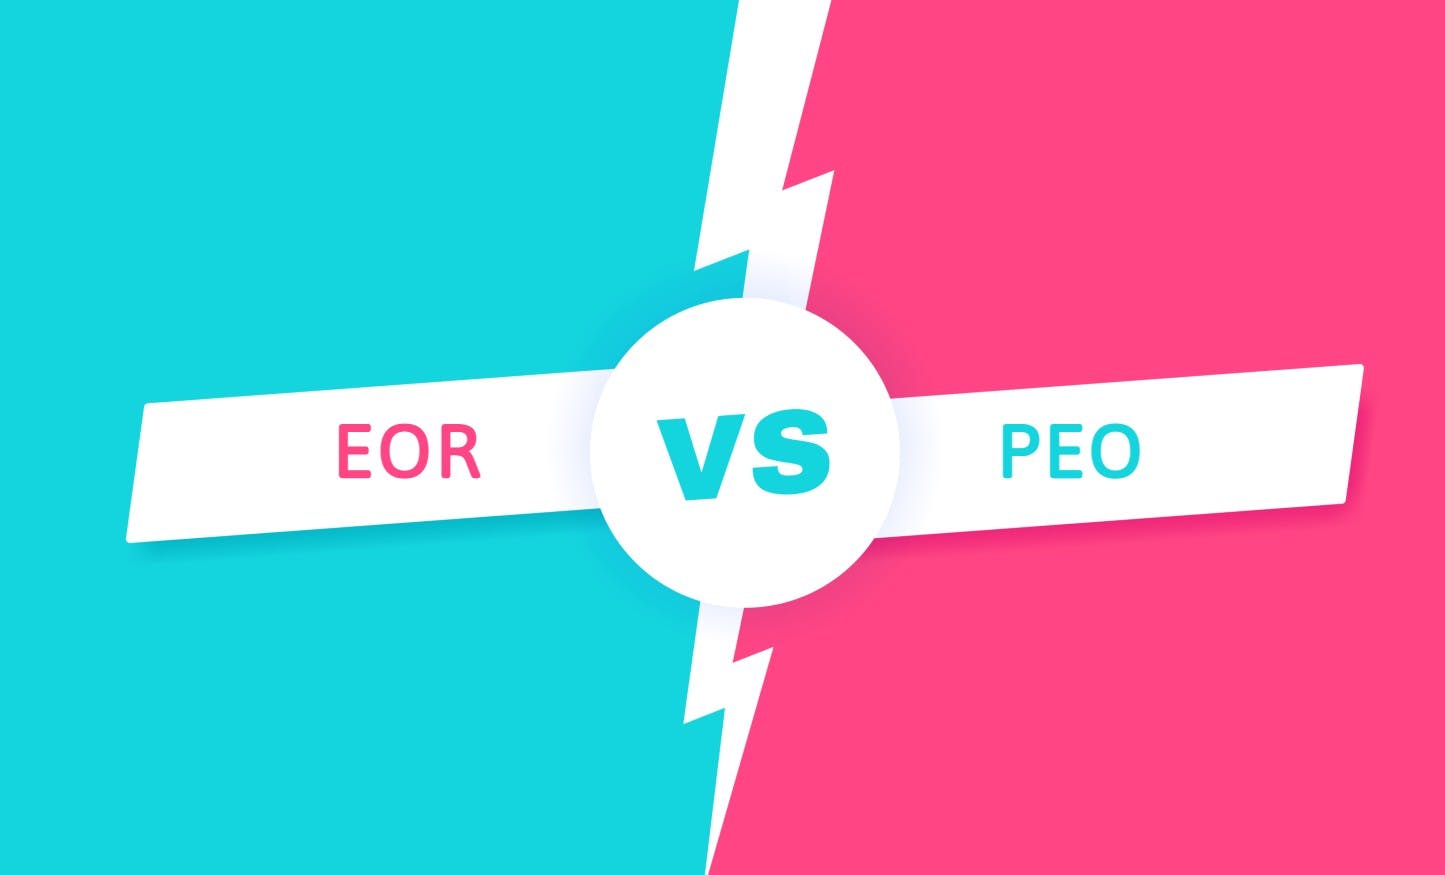 What Exactly Is The Difference Between EOR and PEO?